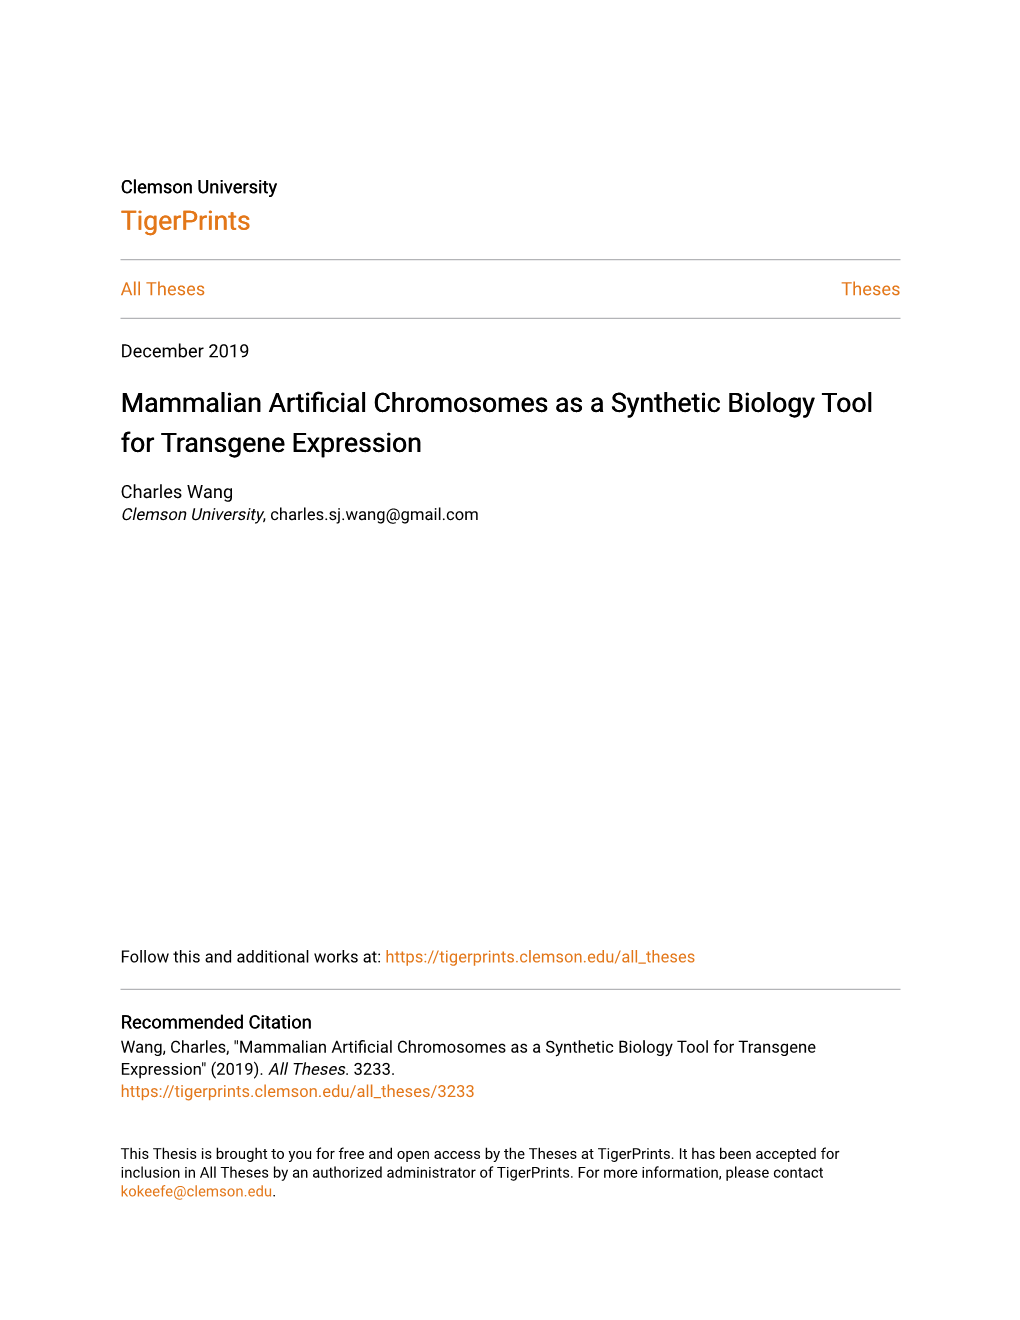 Mammalian Artificial Chromosomes As a Synthetic Biology Tool for Transgene Expression